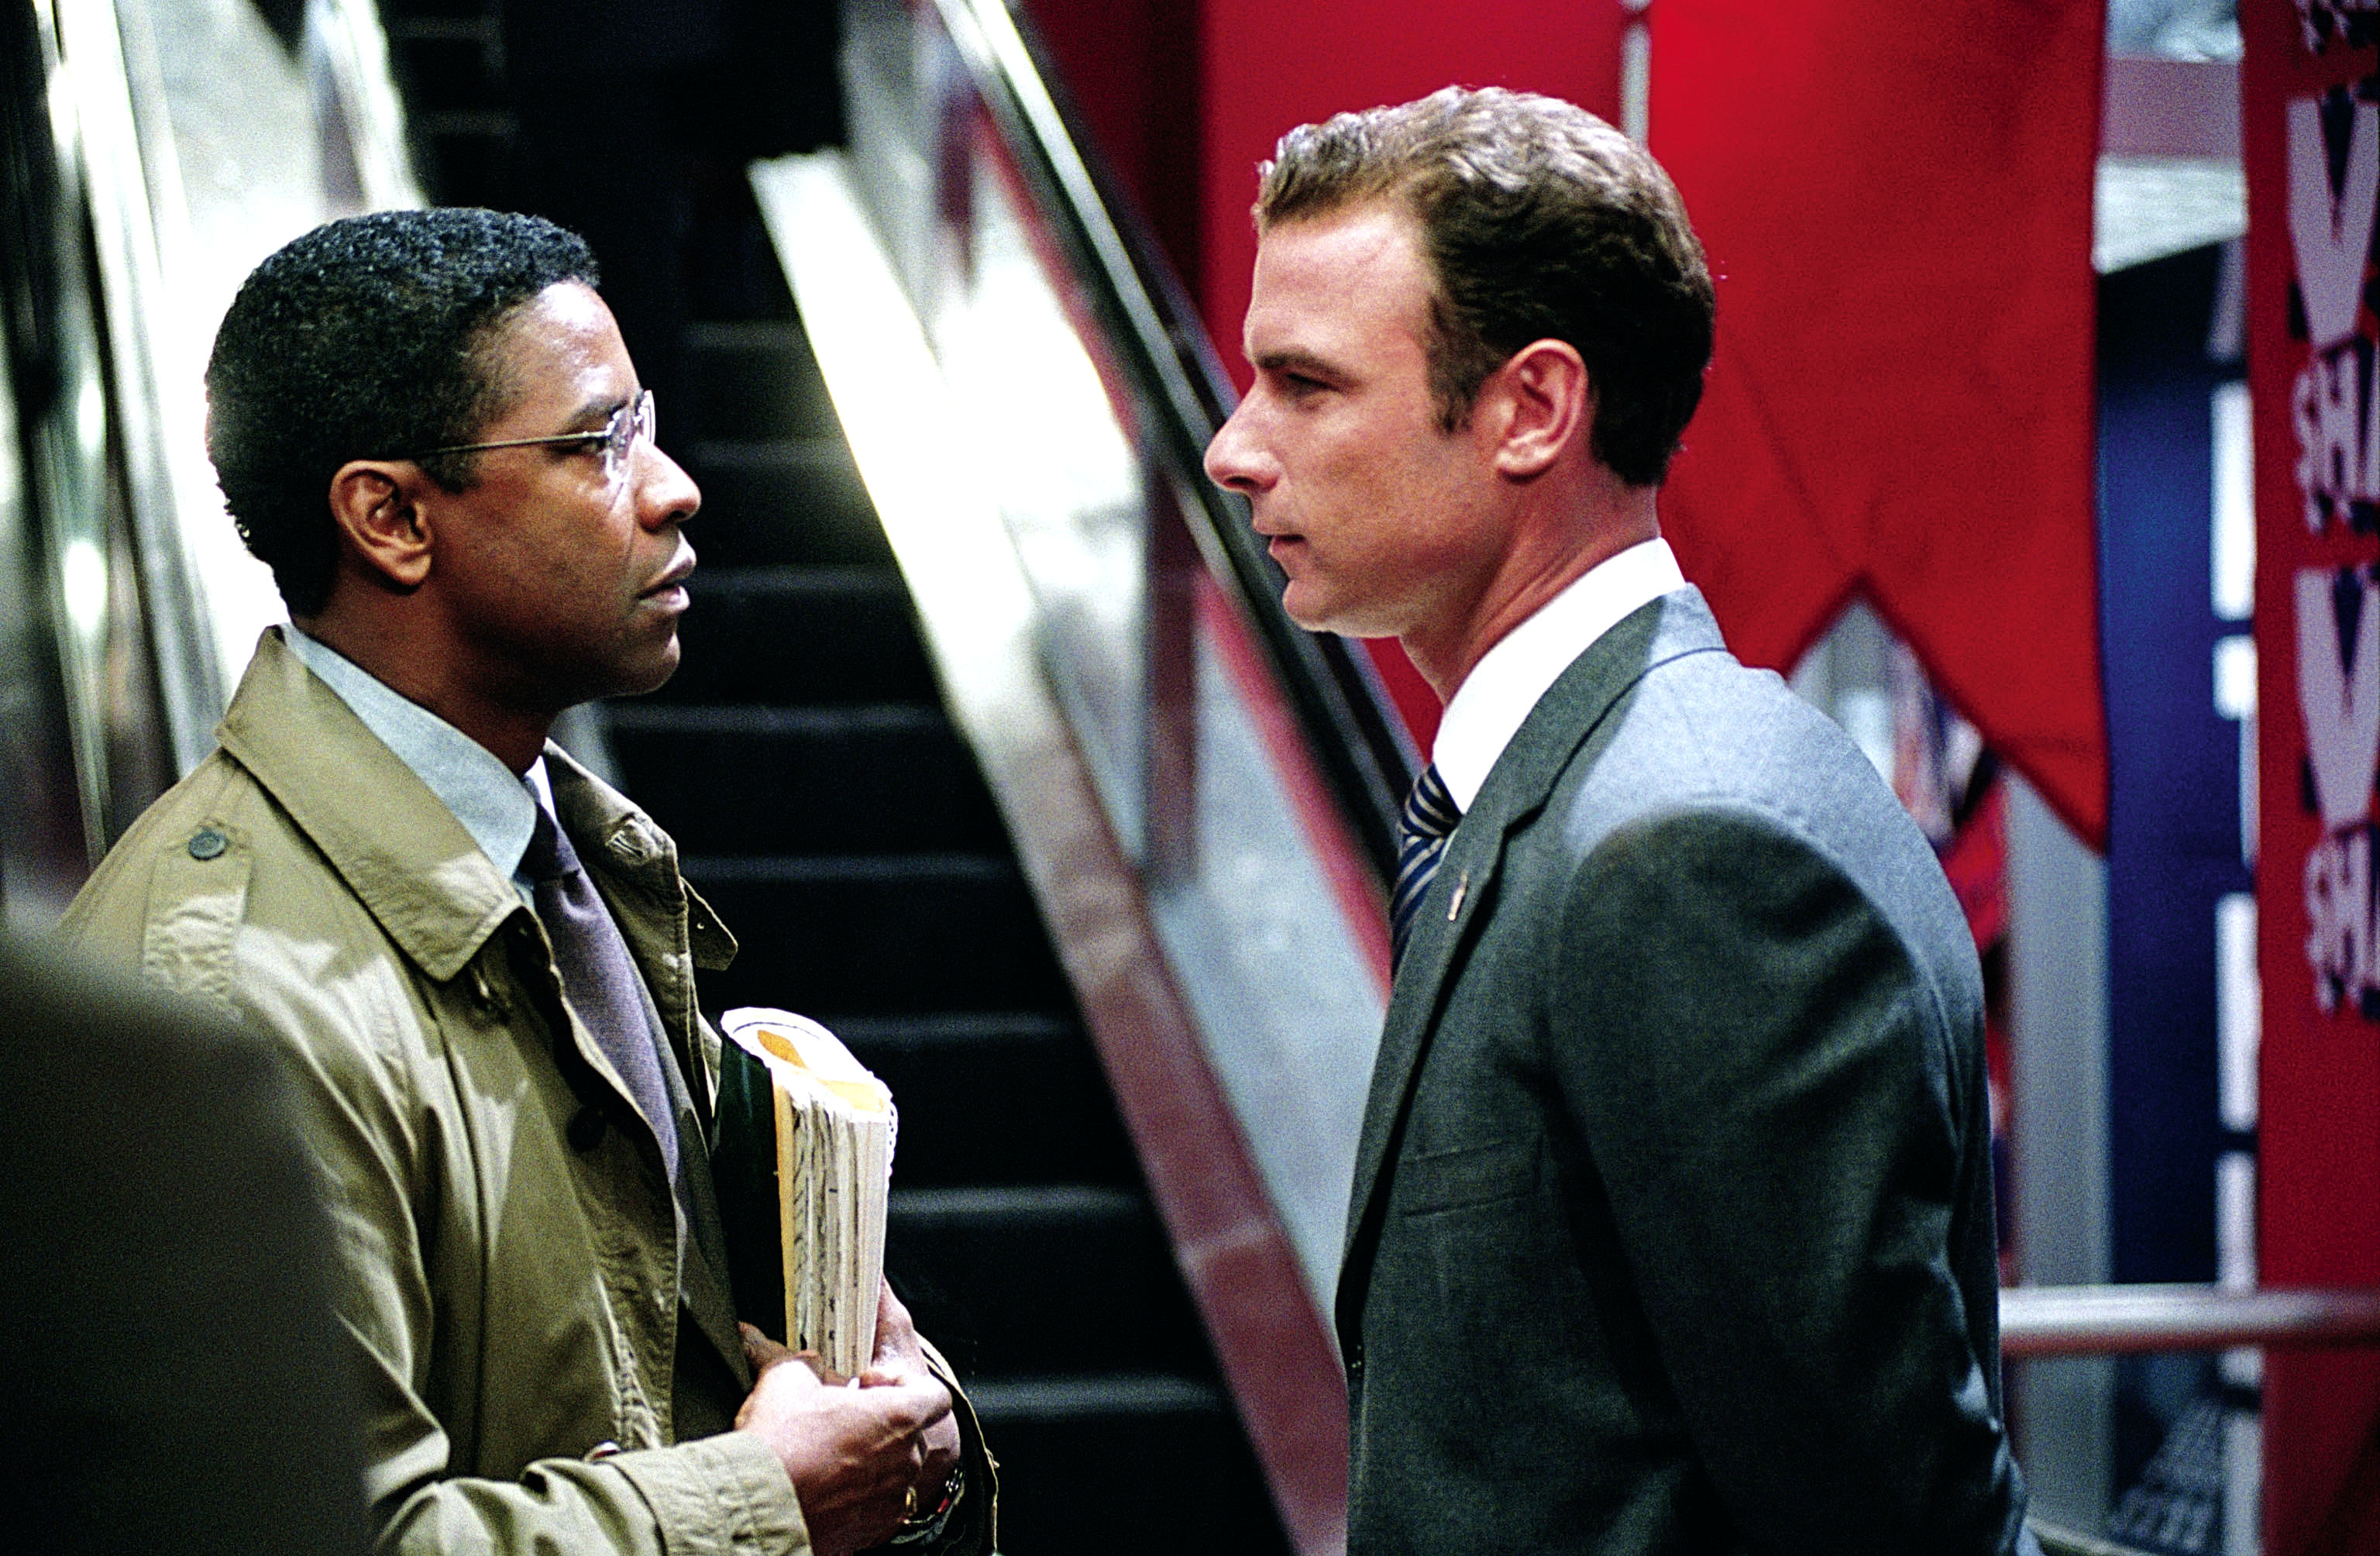 Denzel Washington and Liev Schreiber in a serious conversation, one in a trench coat, the other in a suit and tie